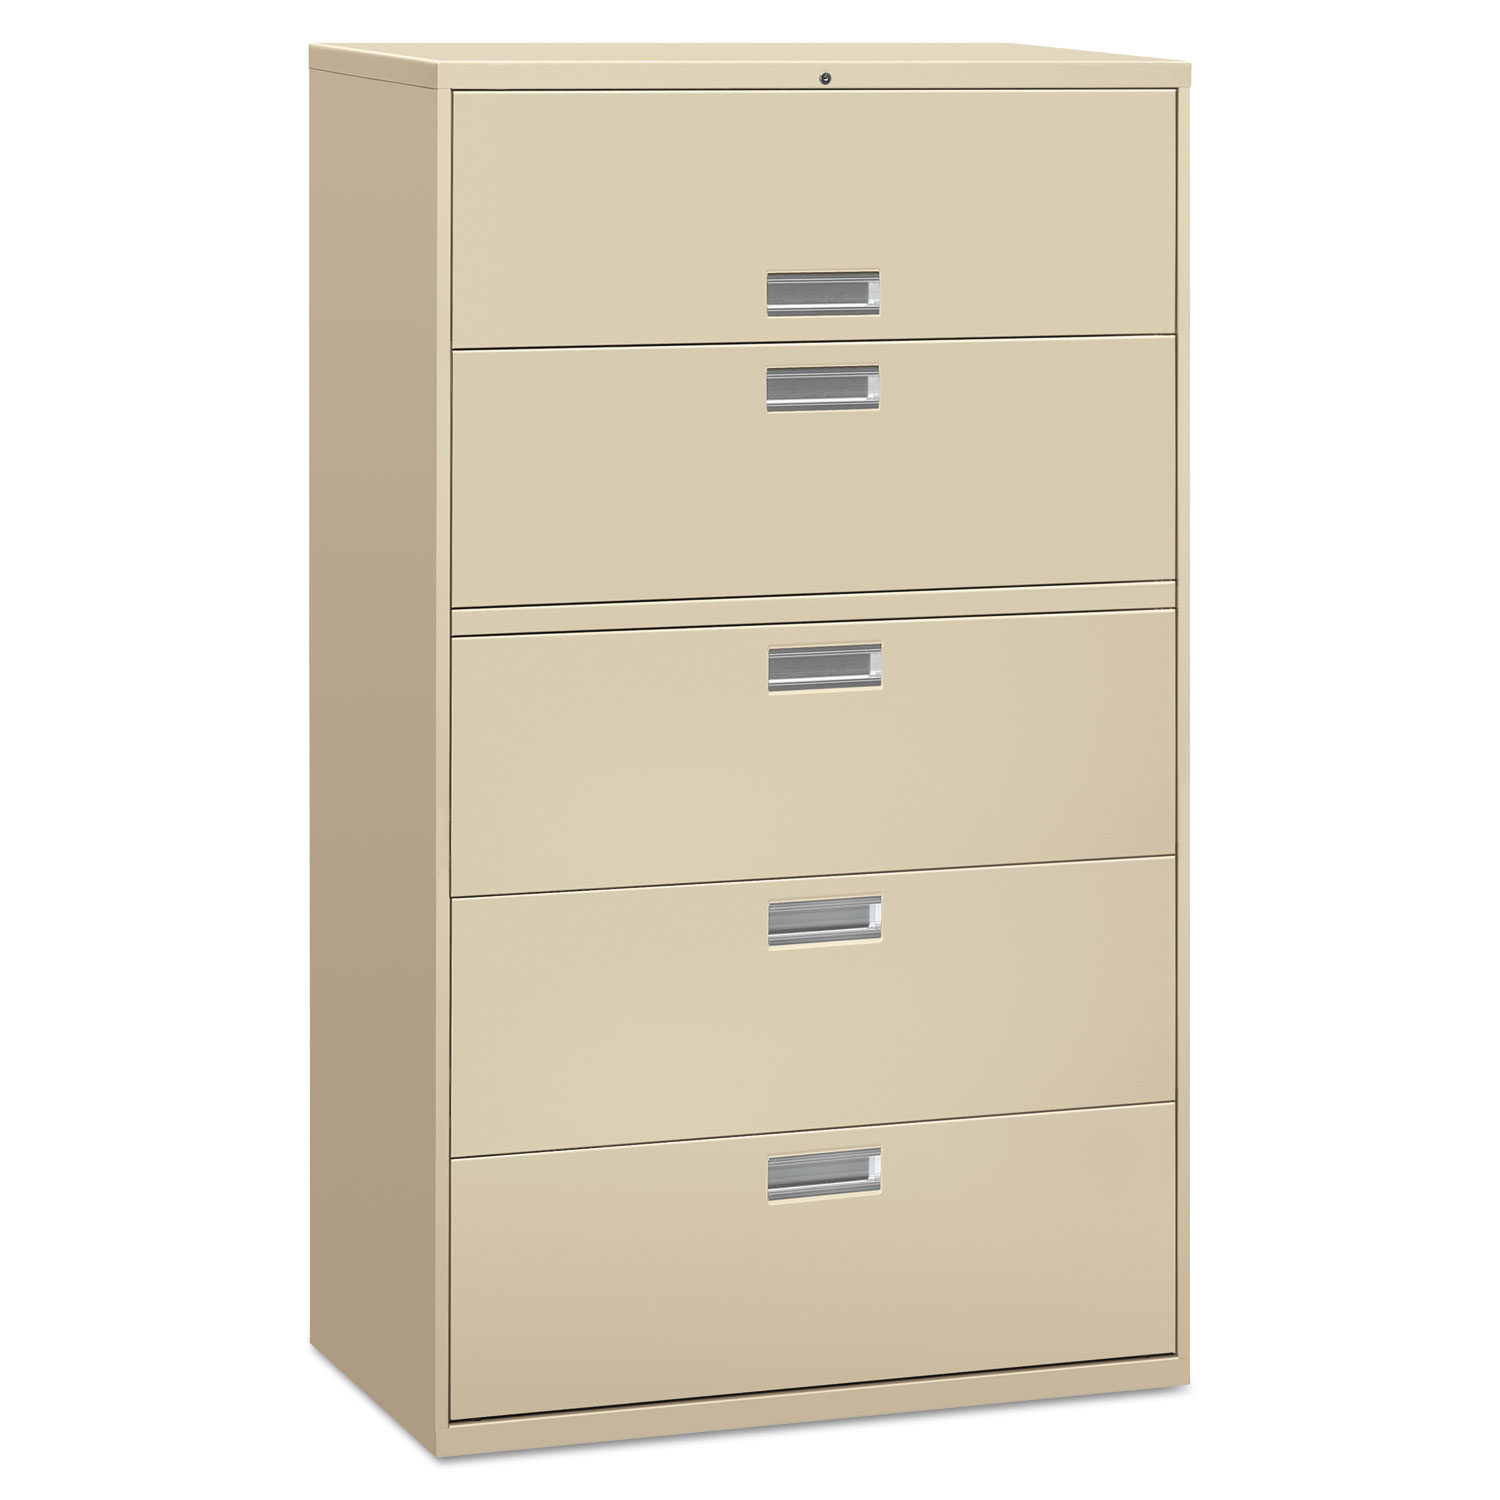 Three-Drawer Lateral File Cabinet, 42w x 18d x 39.5h, Putty - image 2 of 2